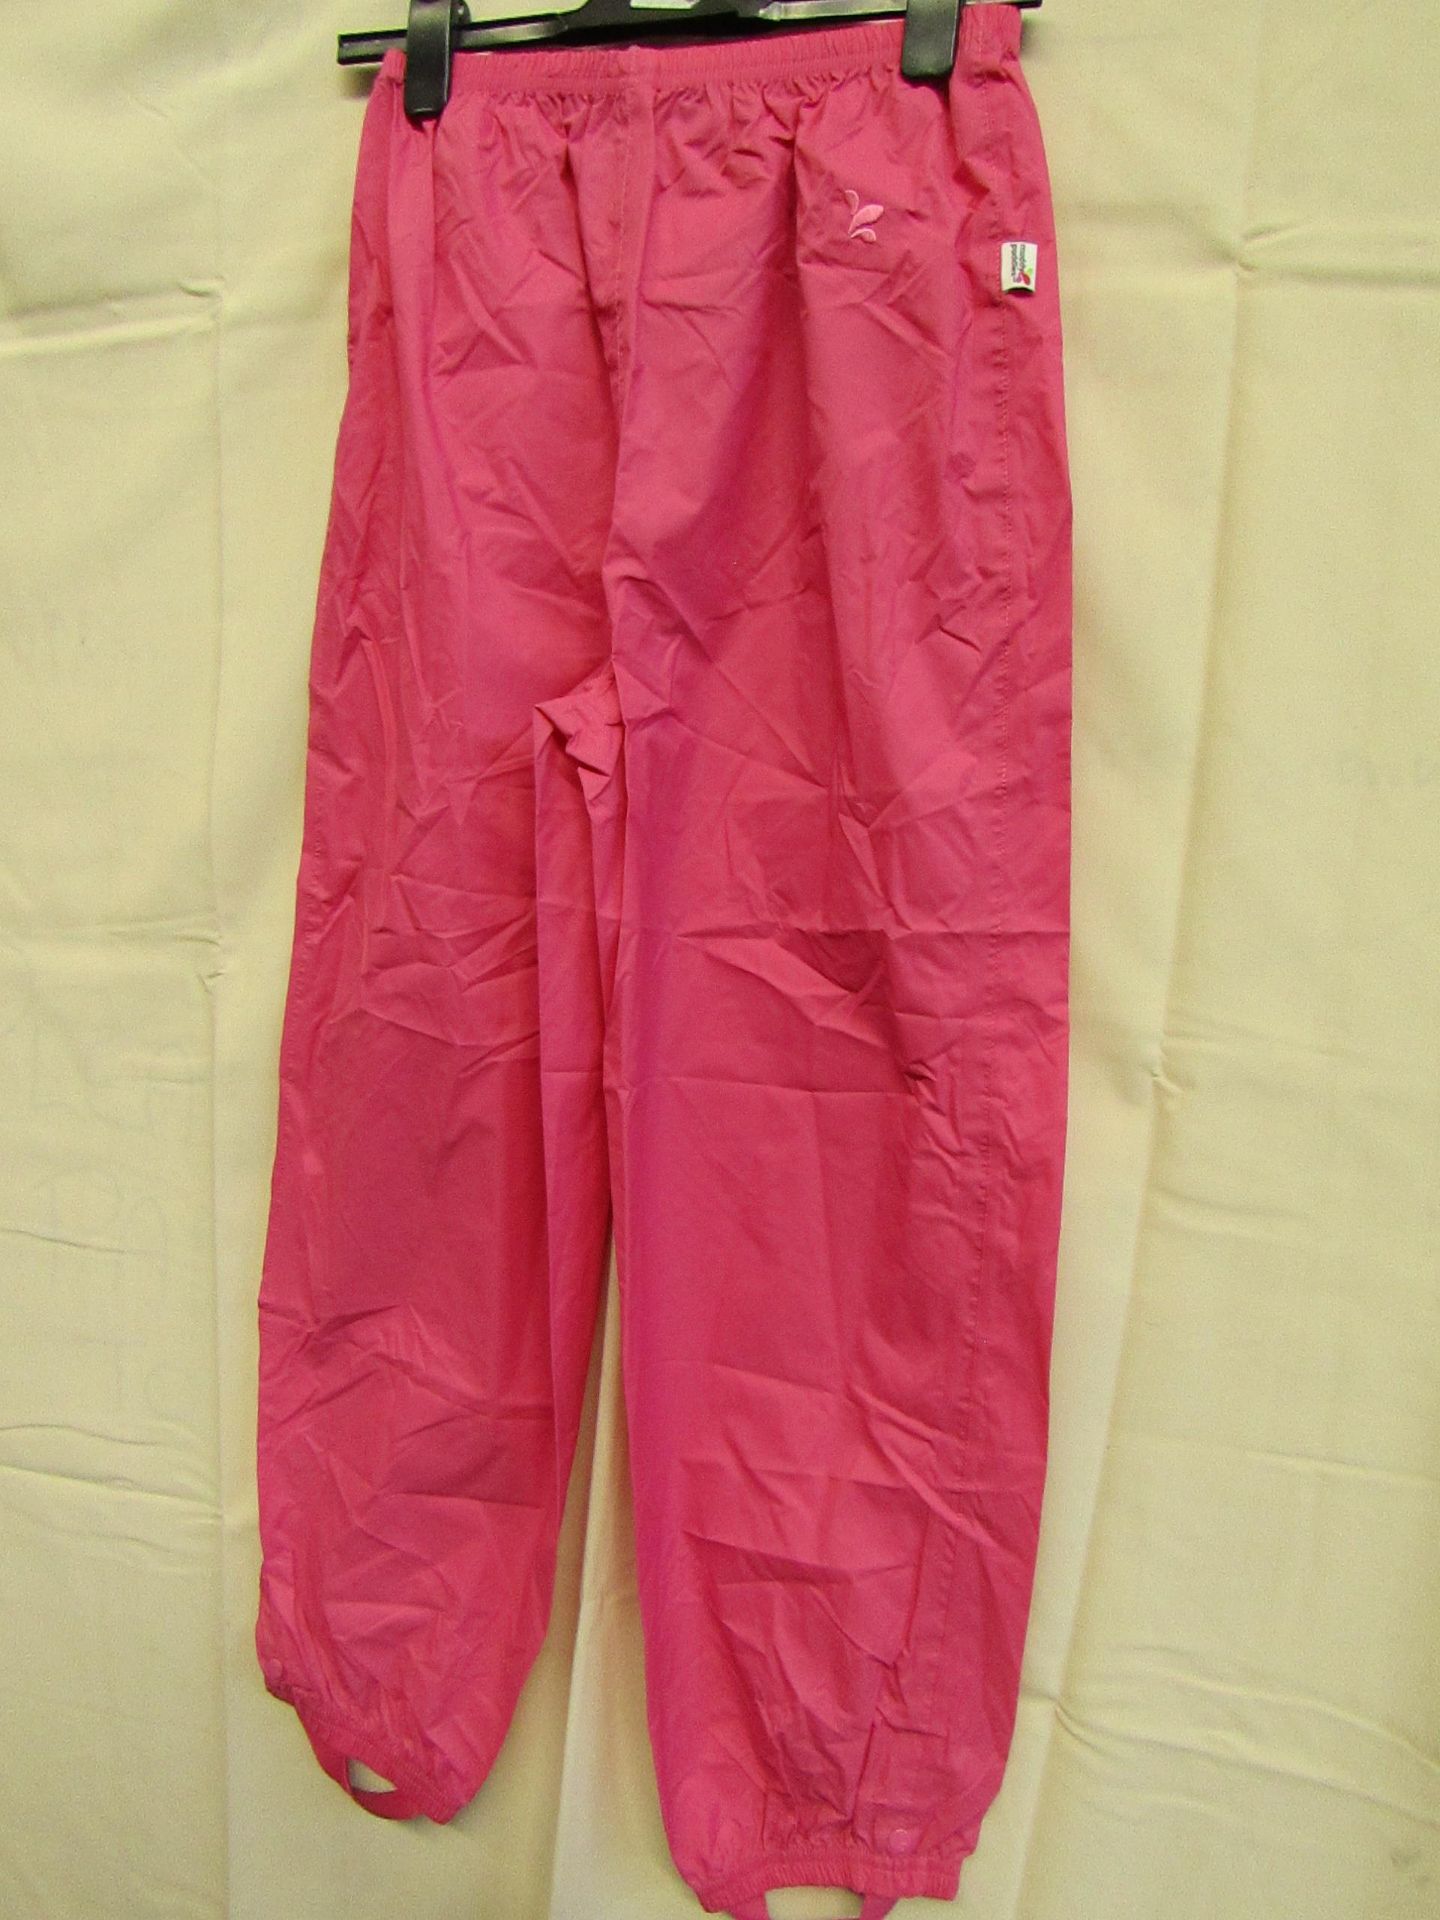 3 X Pairs of Muddy Puddles Waterproof Pants Girls 11-12 yrs Pink New & Packaged